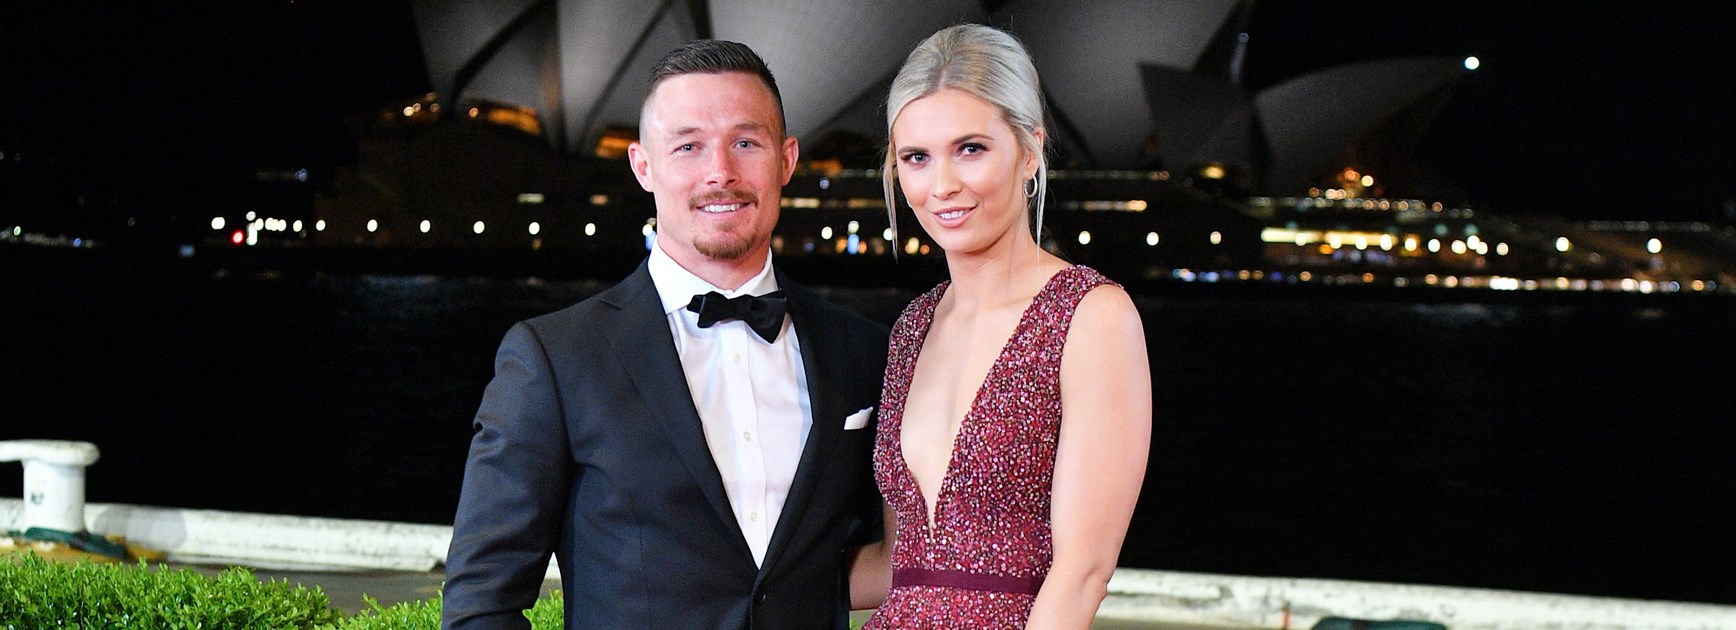 Damien Cook and Courtney Blaine at the 2018 Dally M Awards.